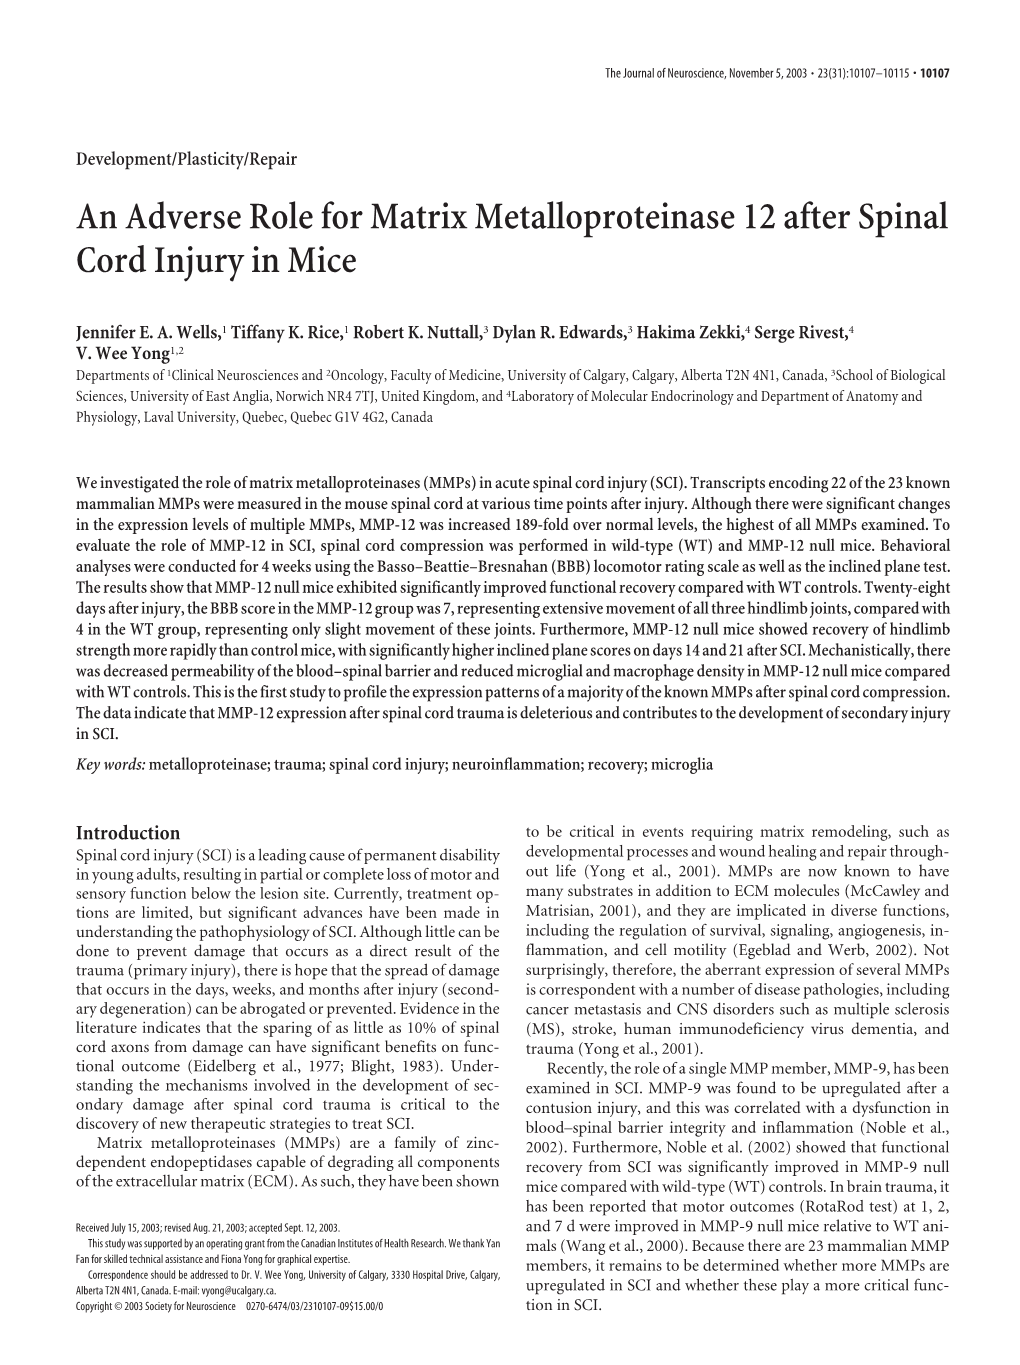 An Adverse Role for Matrix Metalloproteinase 12 After Spinal Cord Injury in Mice